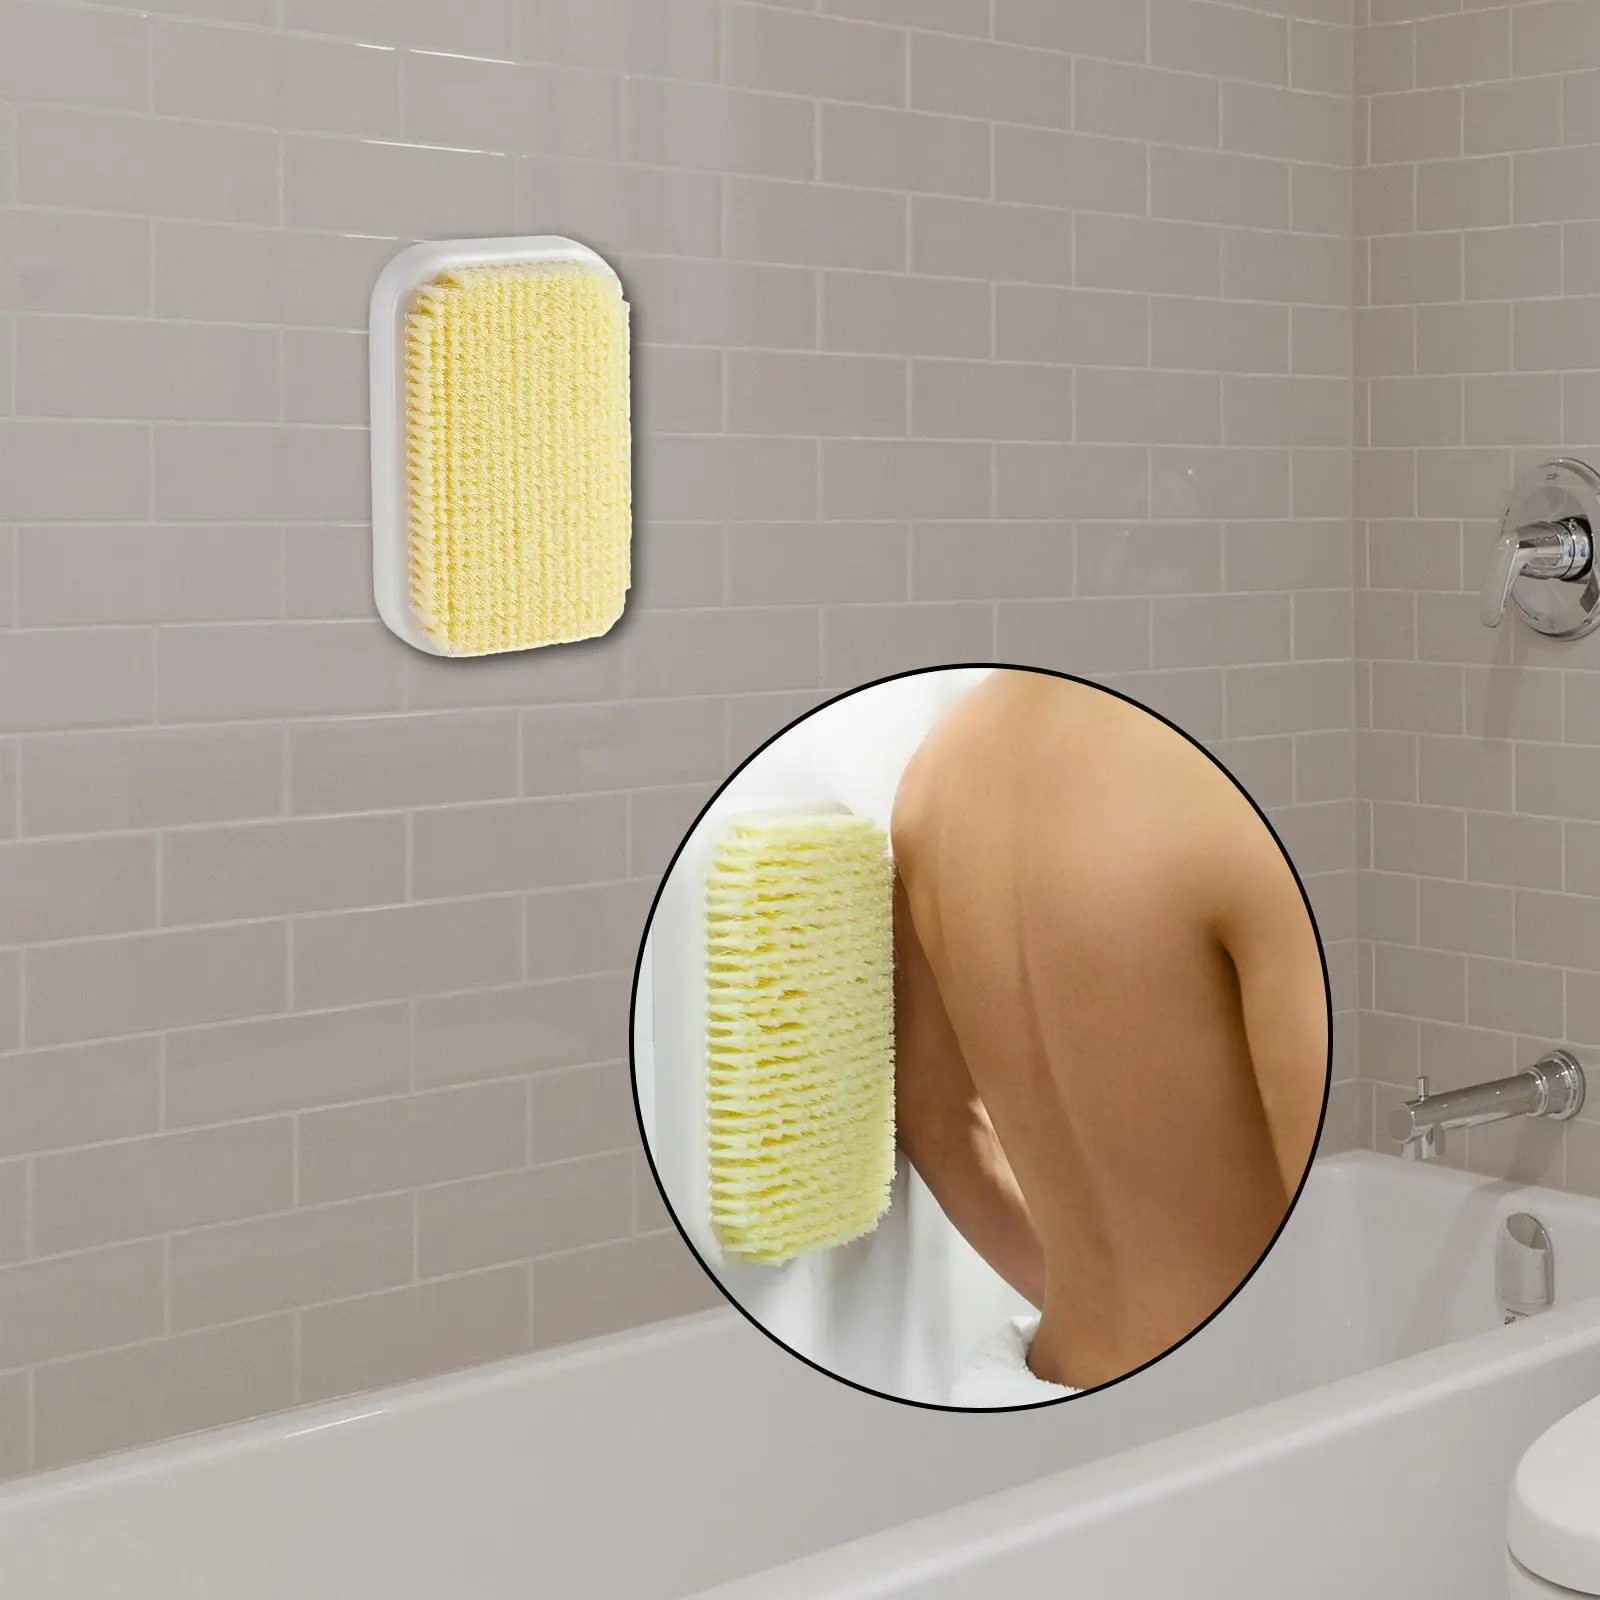 Back Brush Wall Mounted Accessories Nylon PP Cleaning Tool for Bathroom Shower